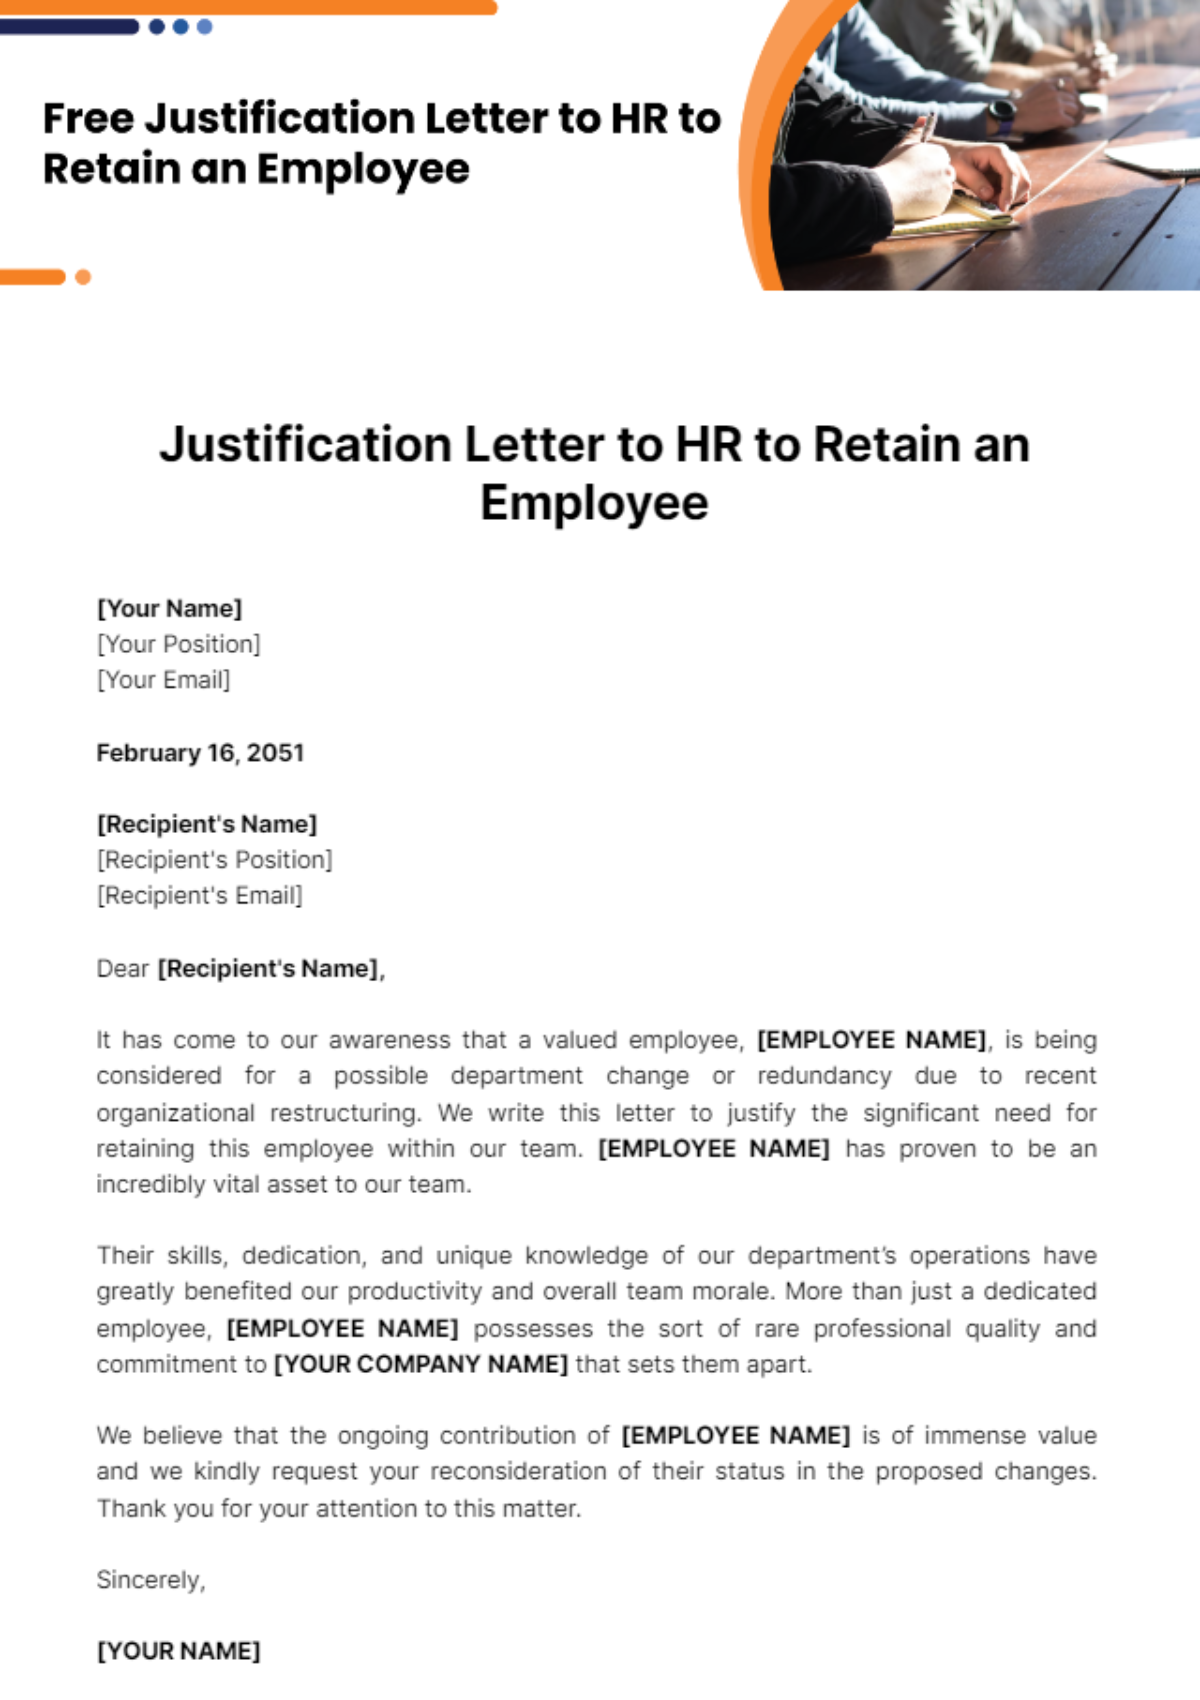 Free Justification Letter to HR to Retain an Employee Template